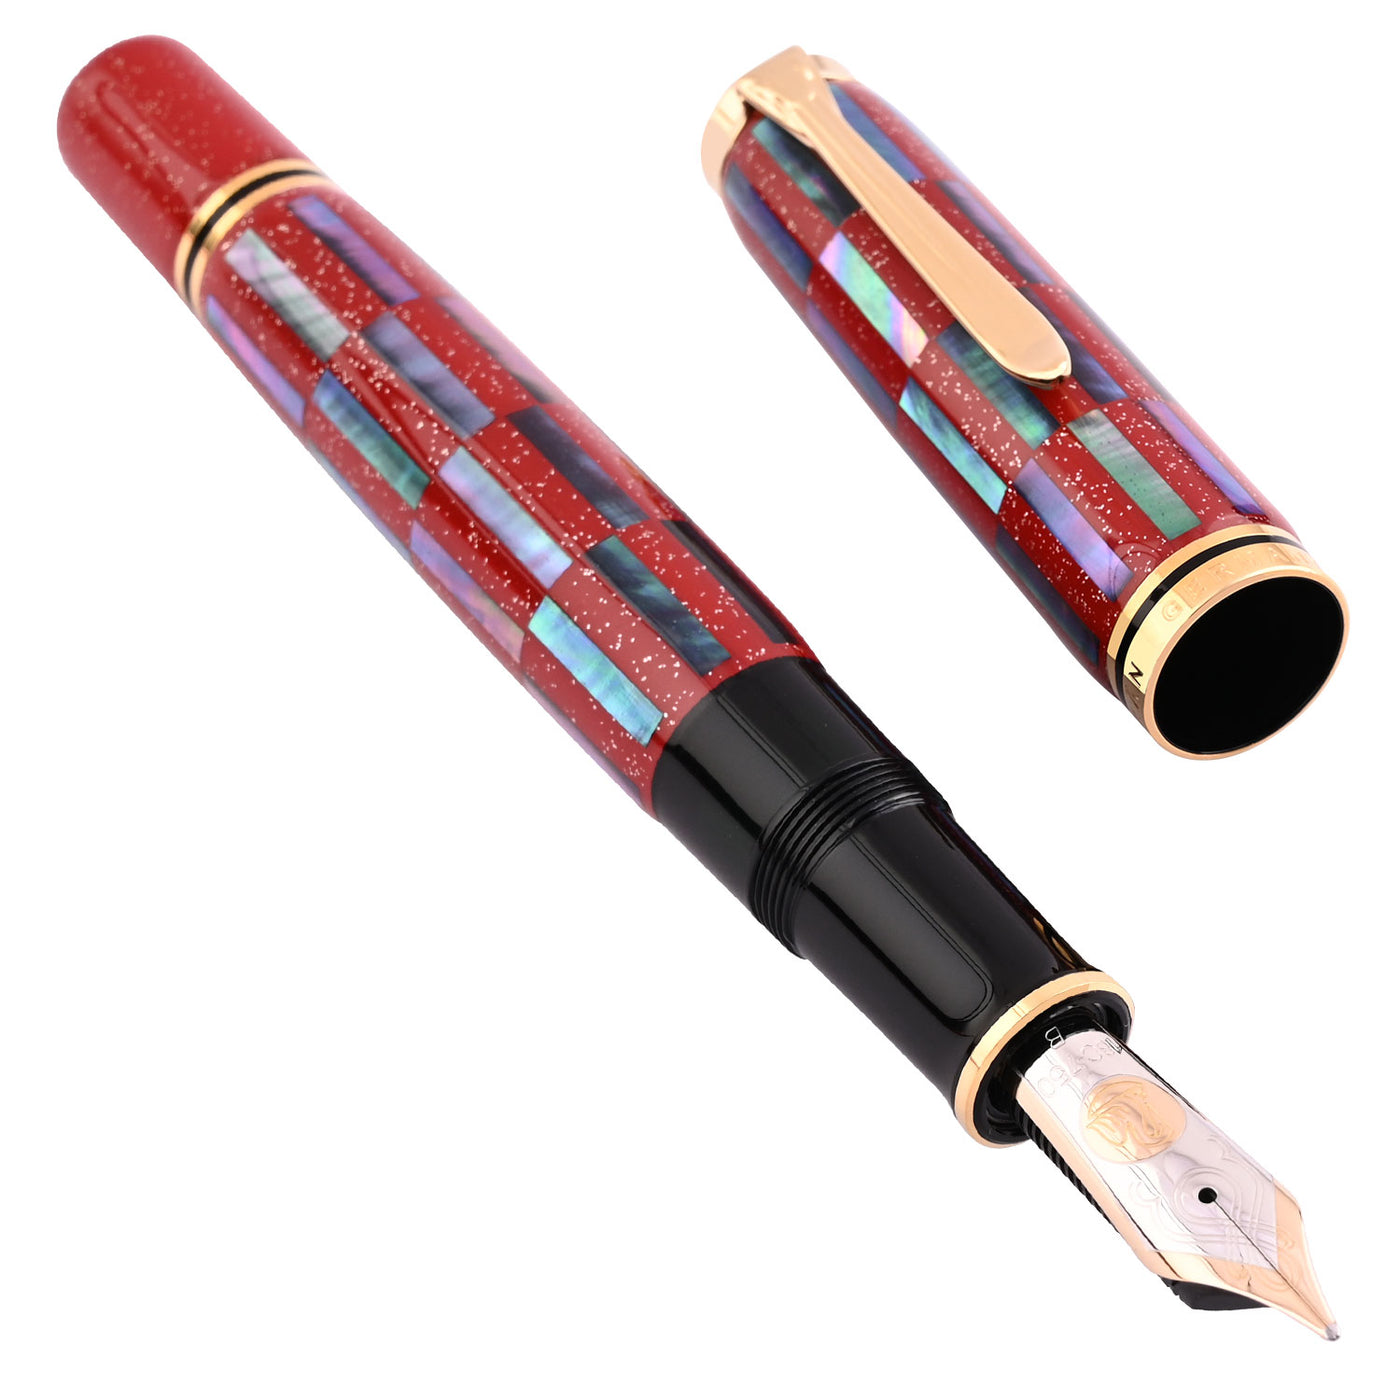 Pelikan M1000 Fountain Pen - Raden Red Infinity (Limited Edition) 3